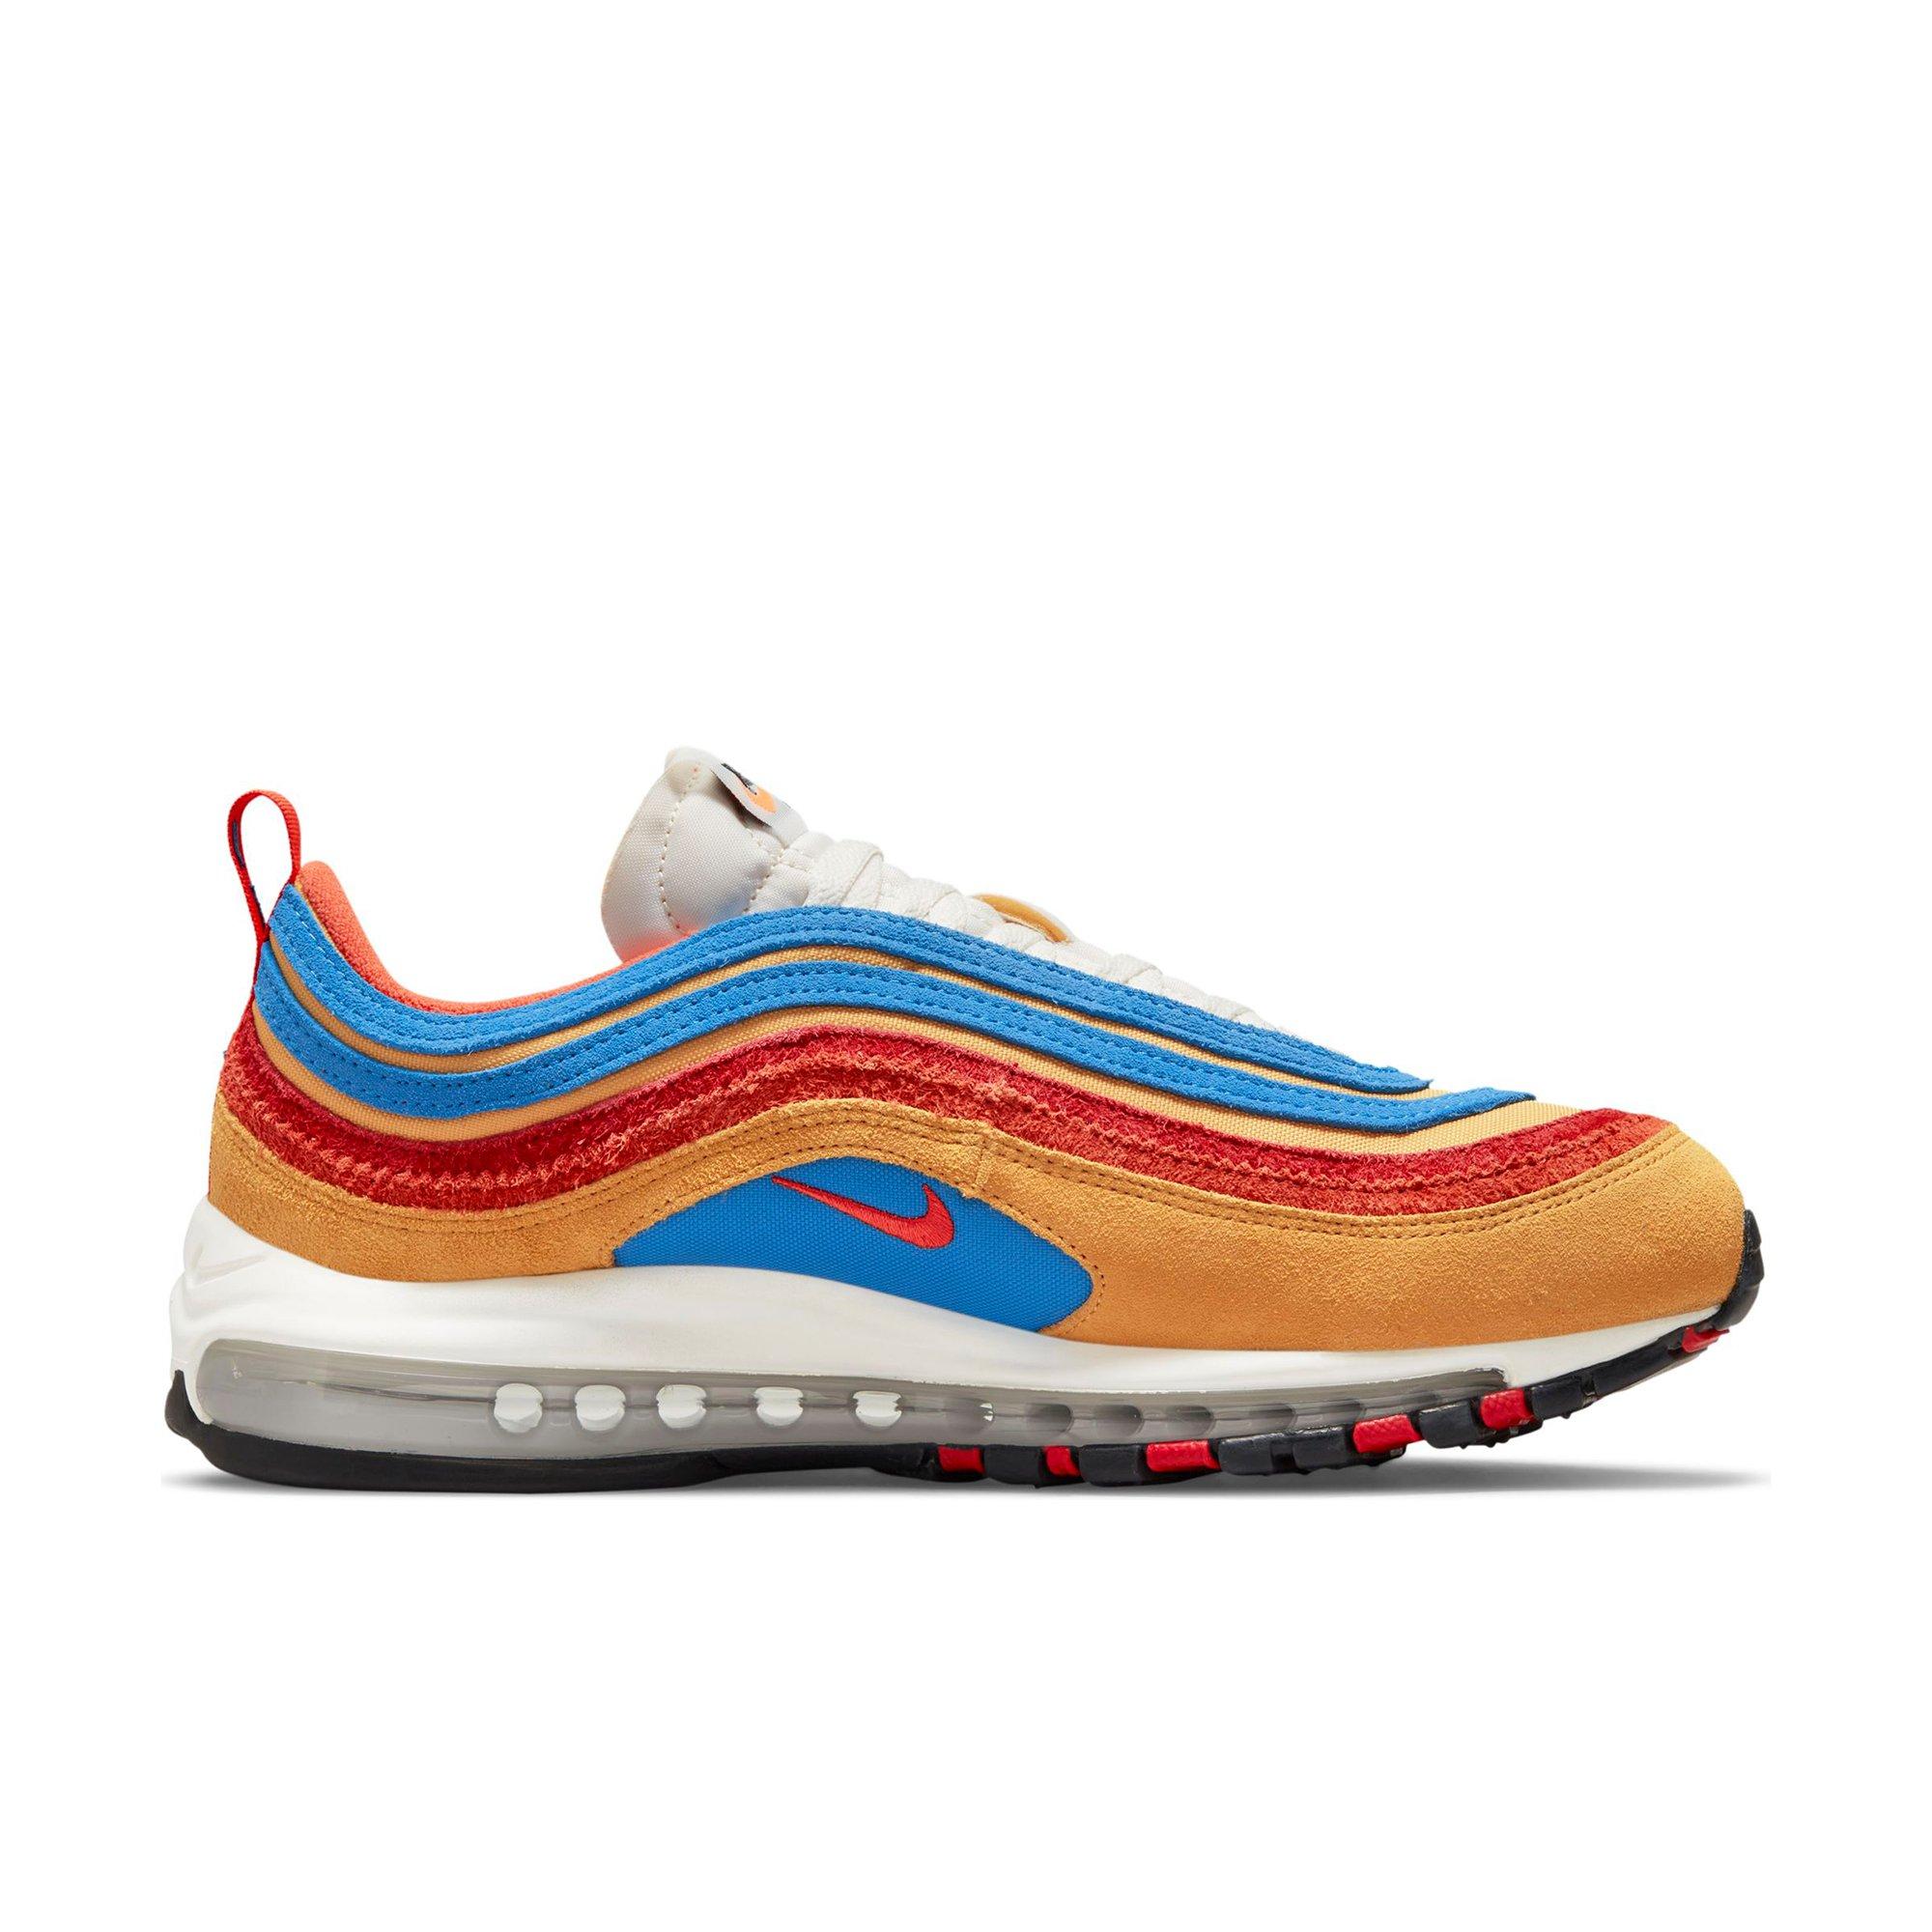 red yellow blue air max 97